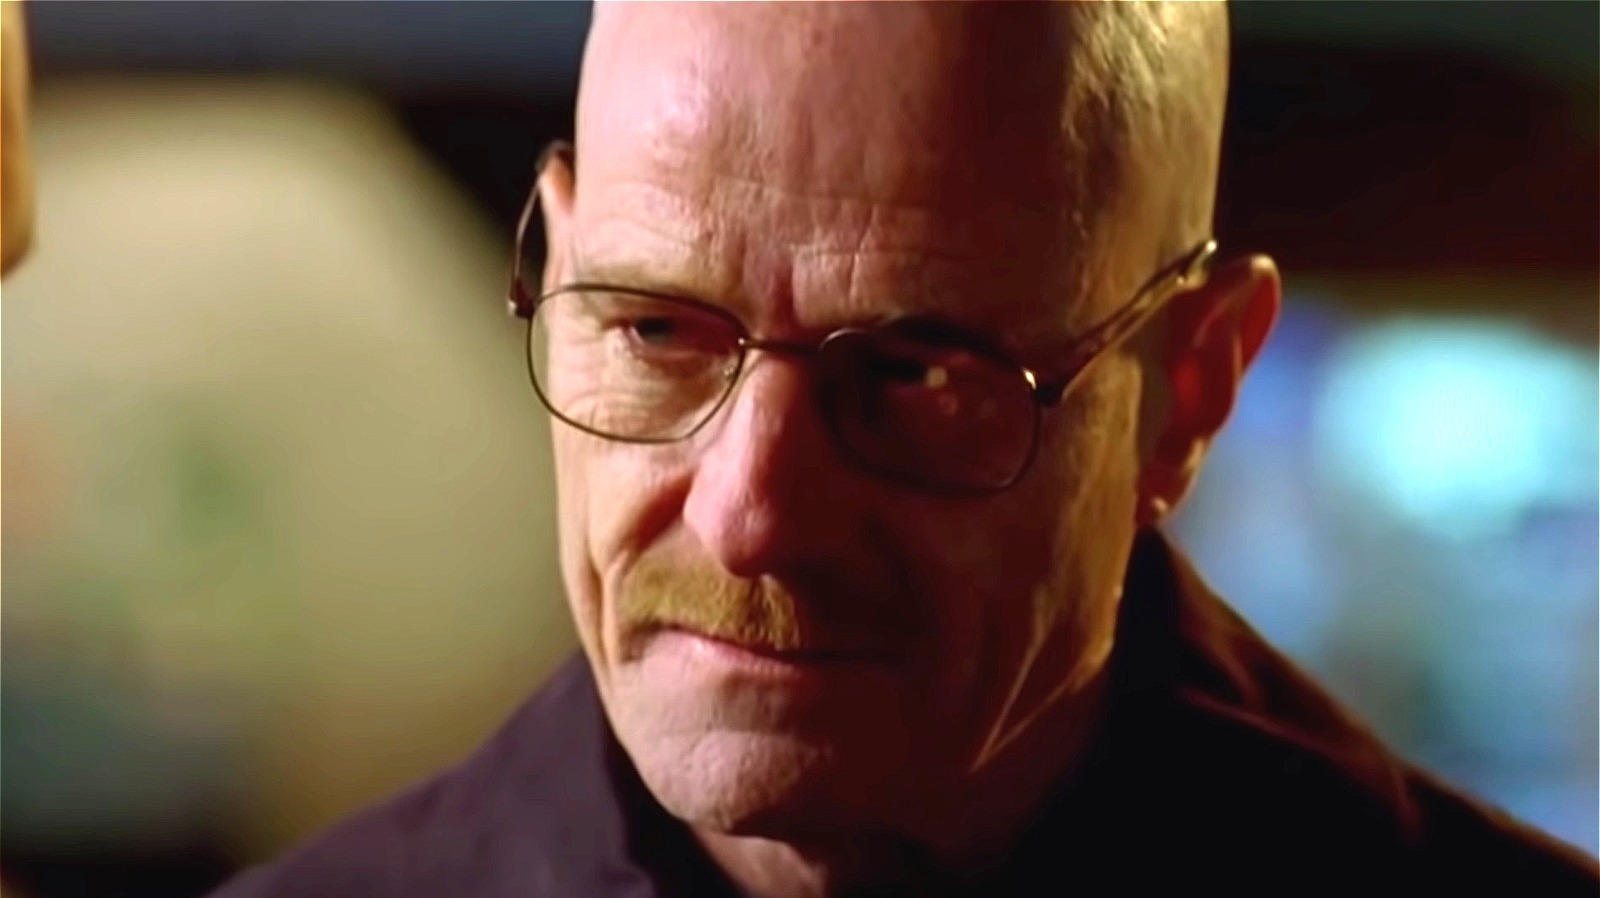 The Highest-Rated Episodes Of Breaking Bad According To IMDb